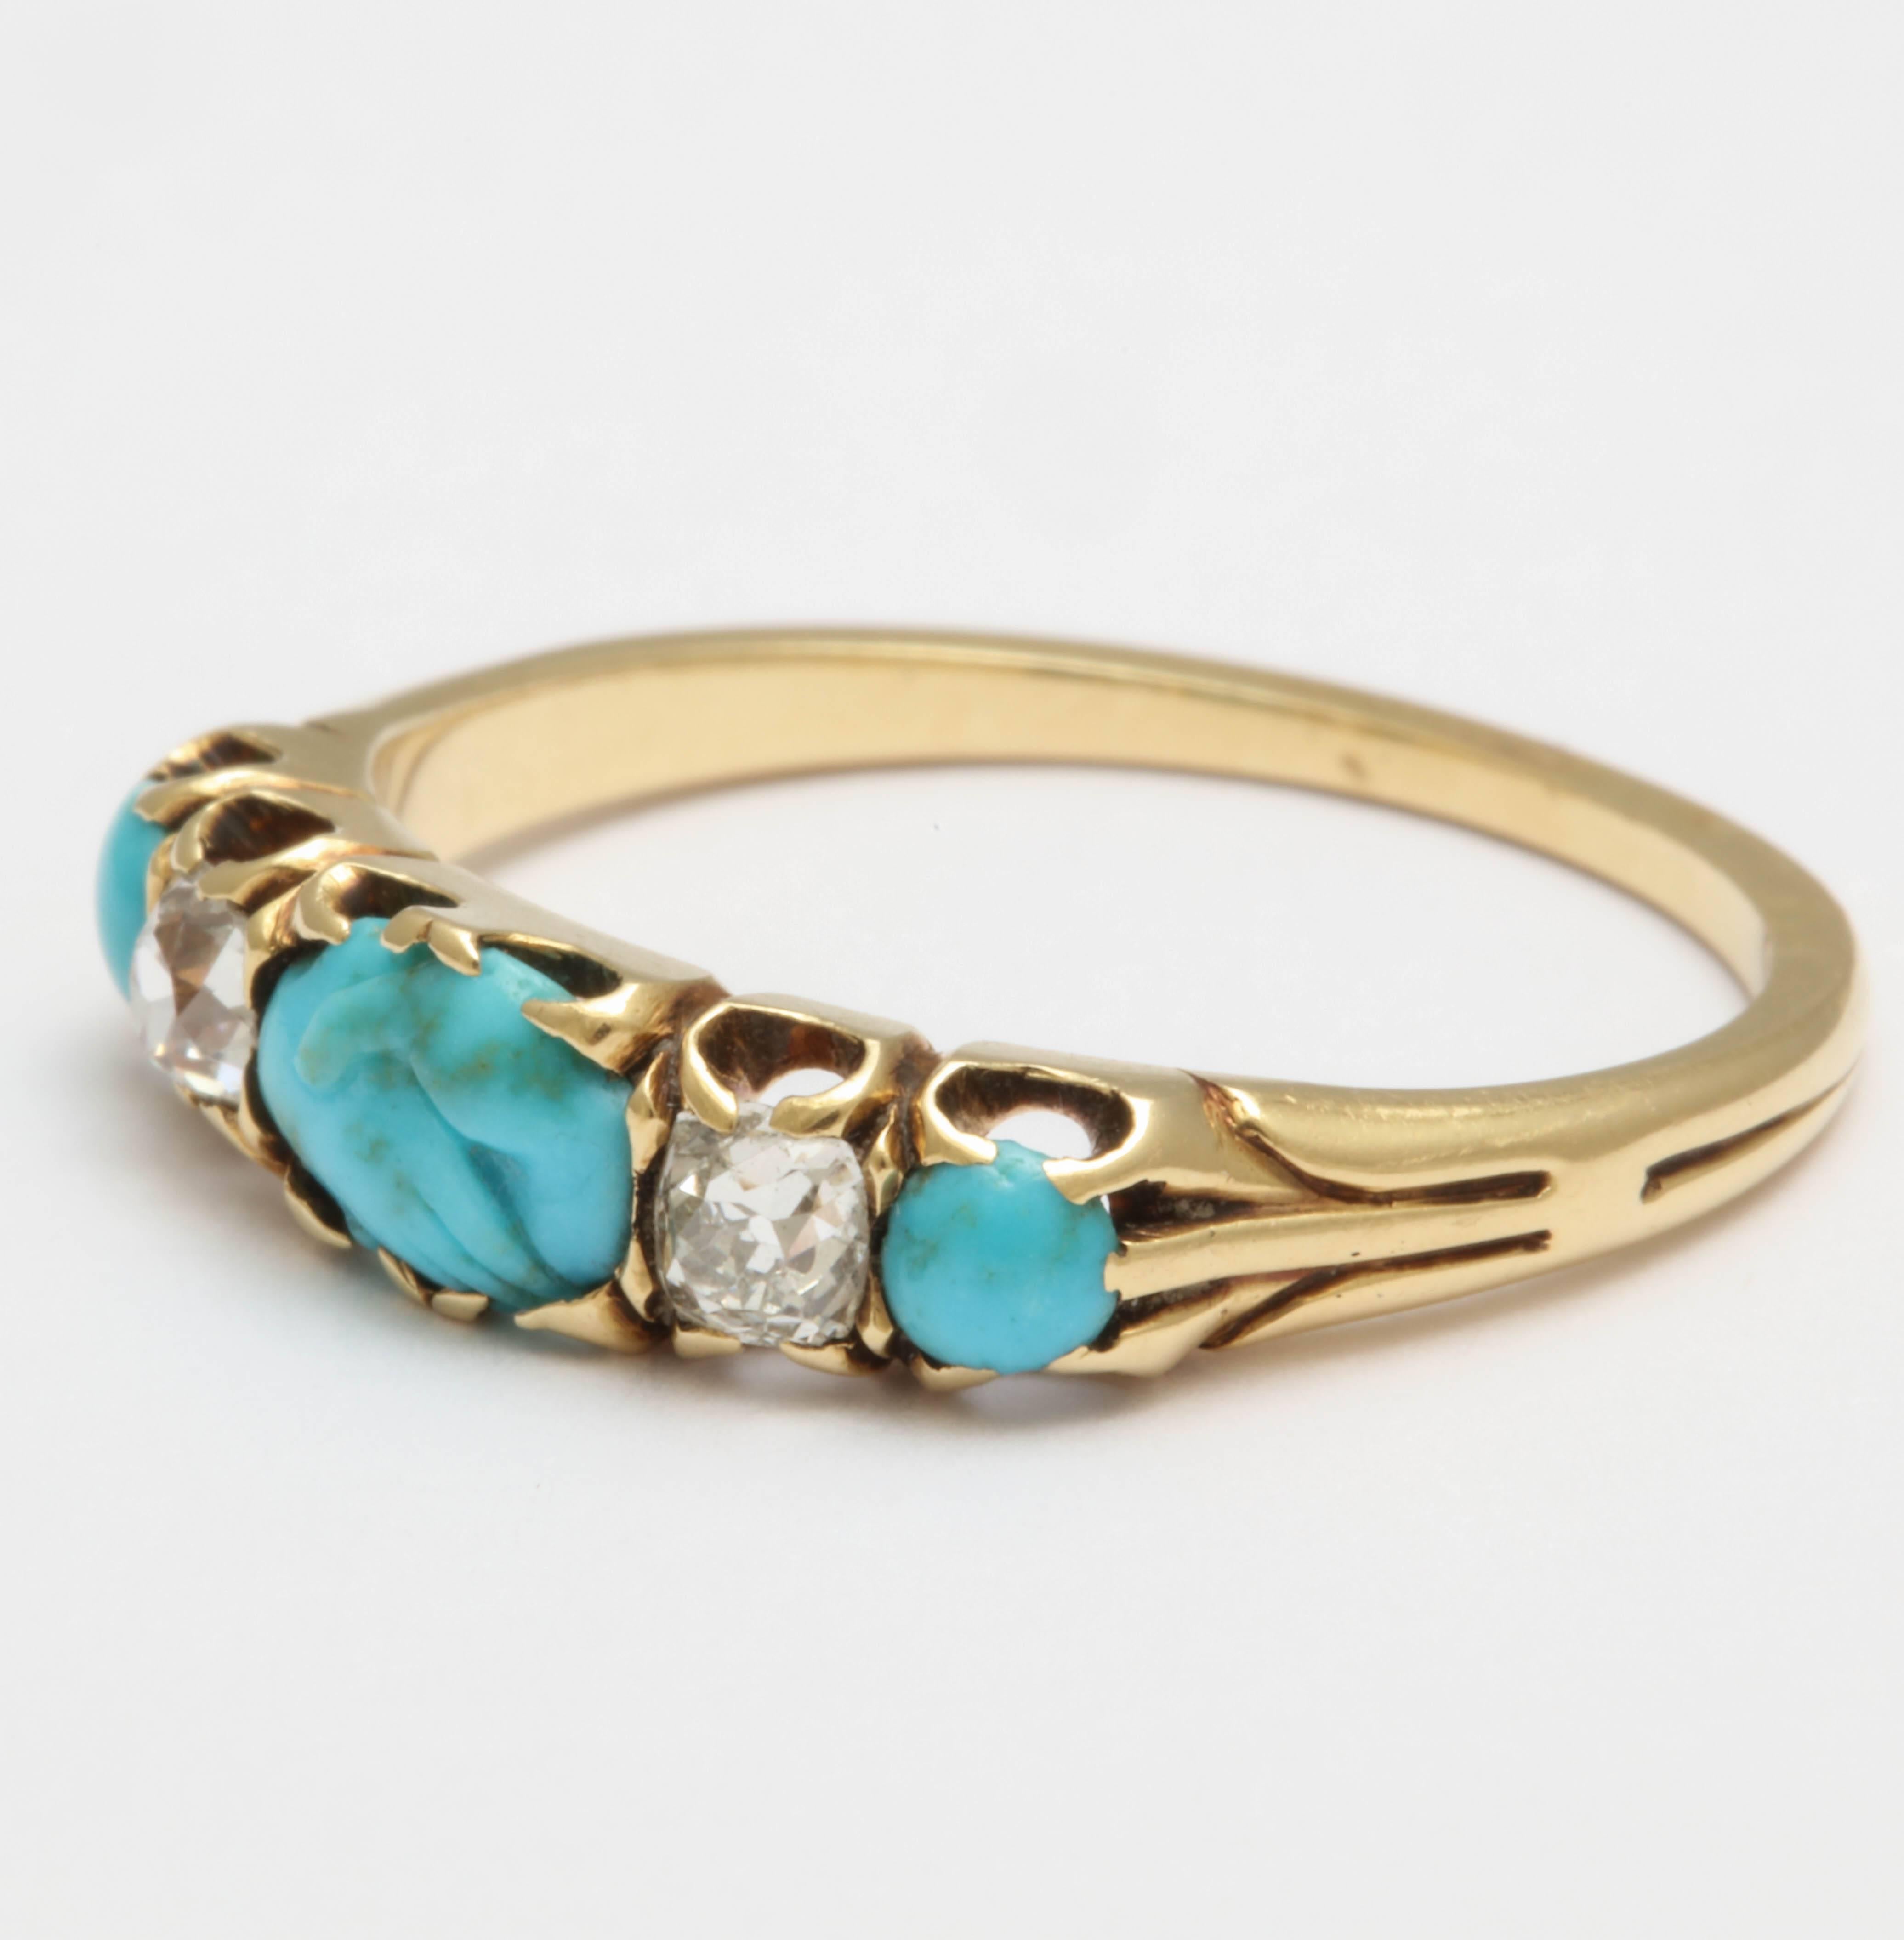 Fede, to hands clasp in union, was a popular motif of the Georgian and Victorian Era. The central carved turquoise of the two hands is possibly Georgian or Victorian, yet the ring and the mounting is certainly of Victorian design. Flanking the